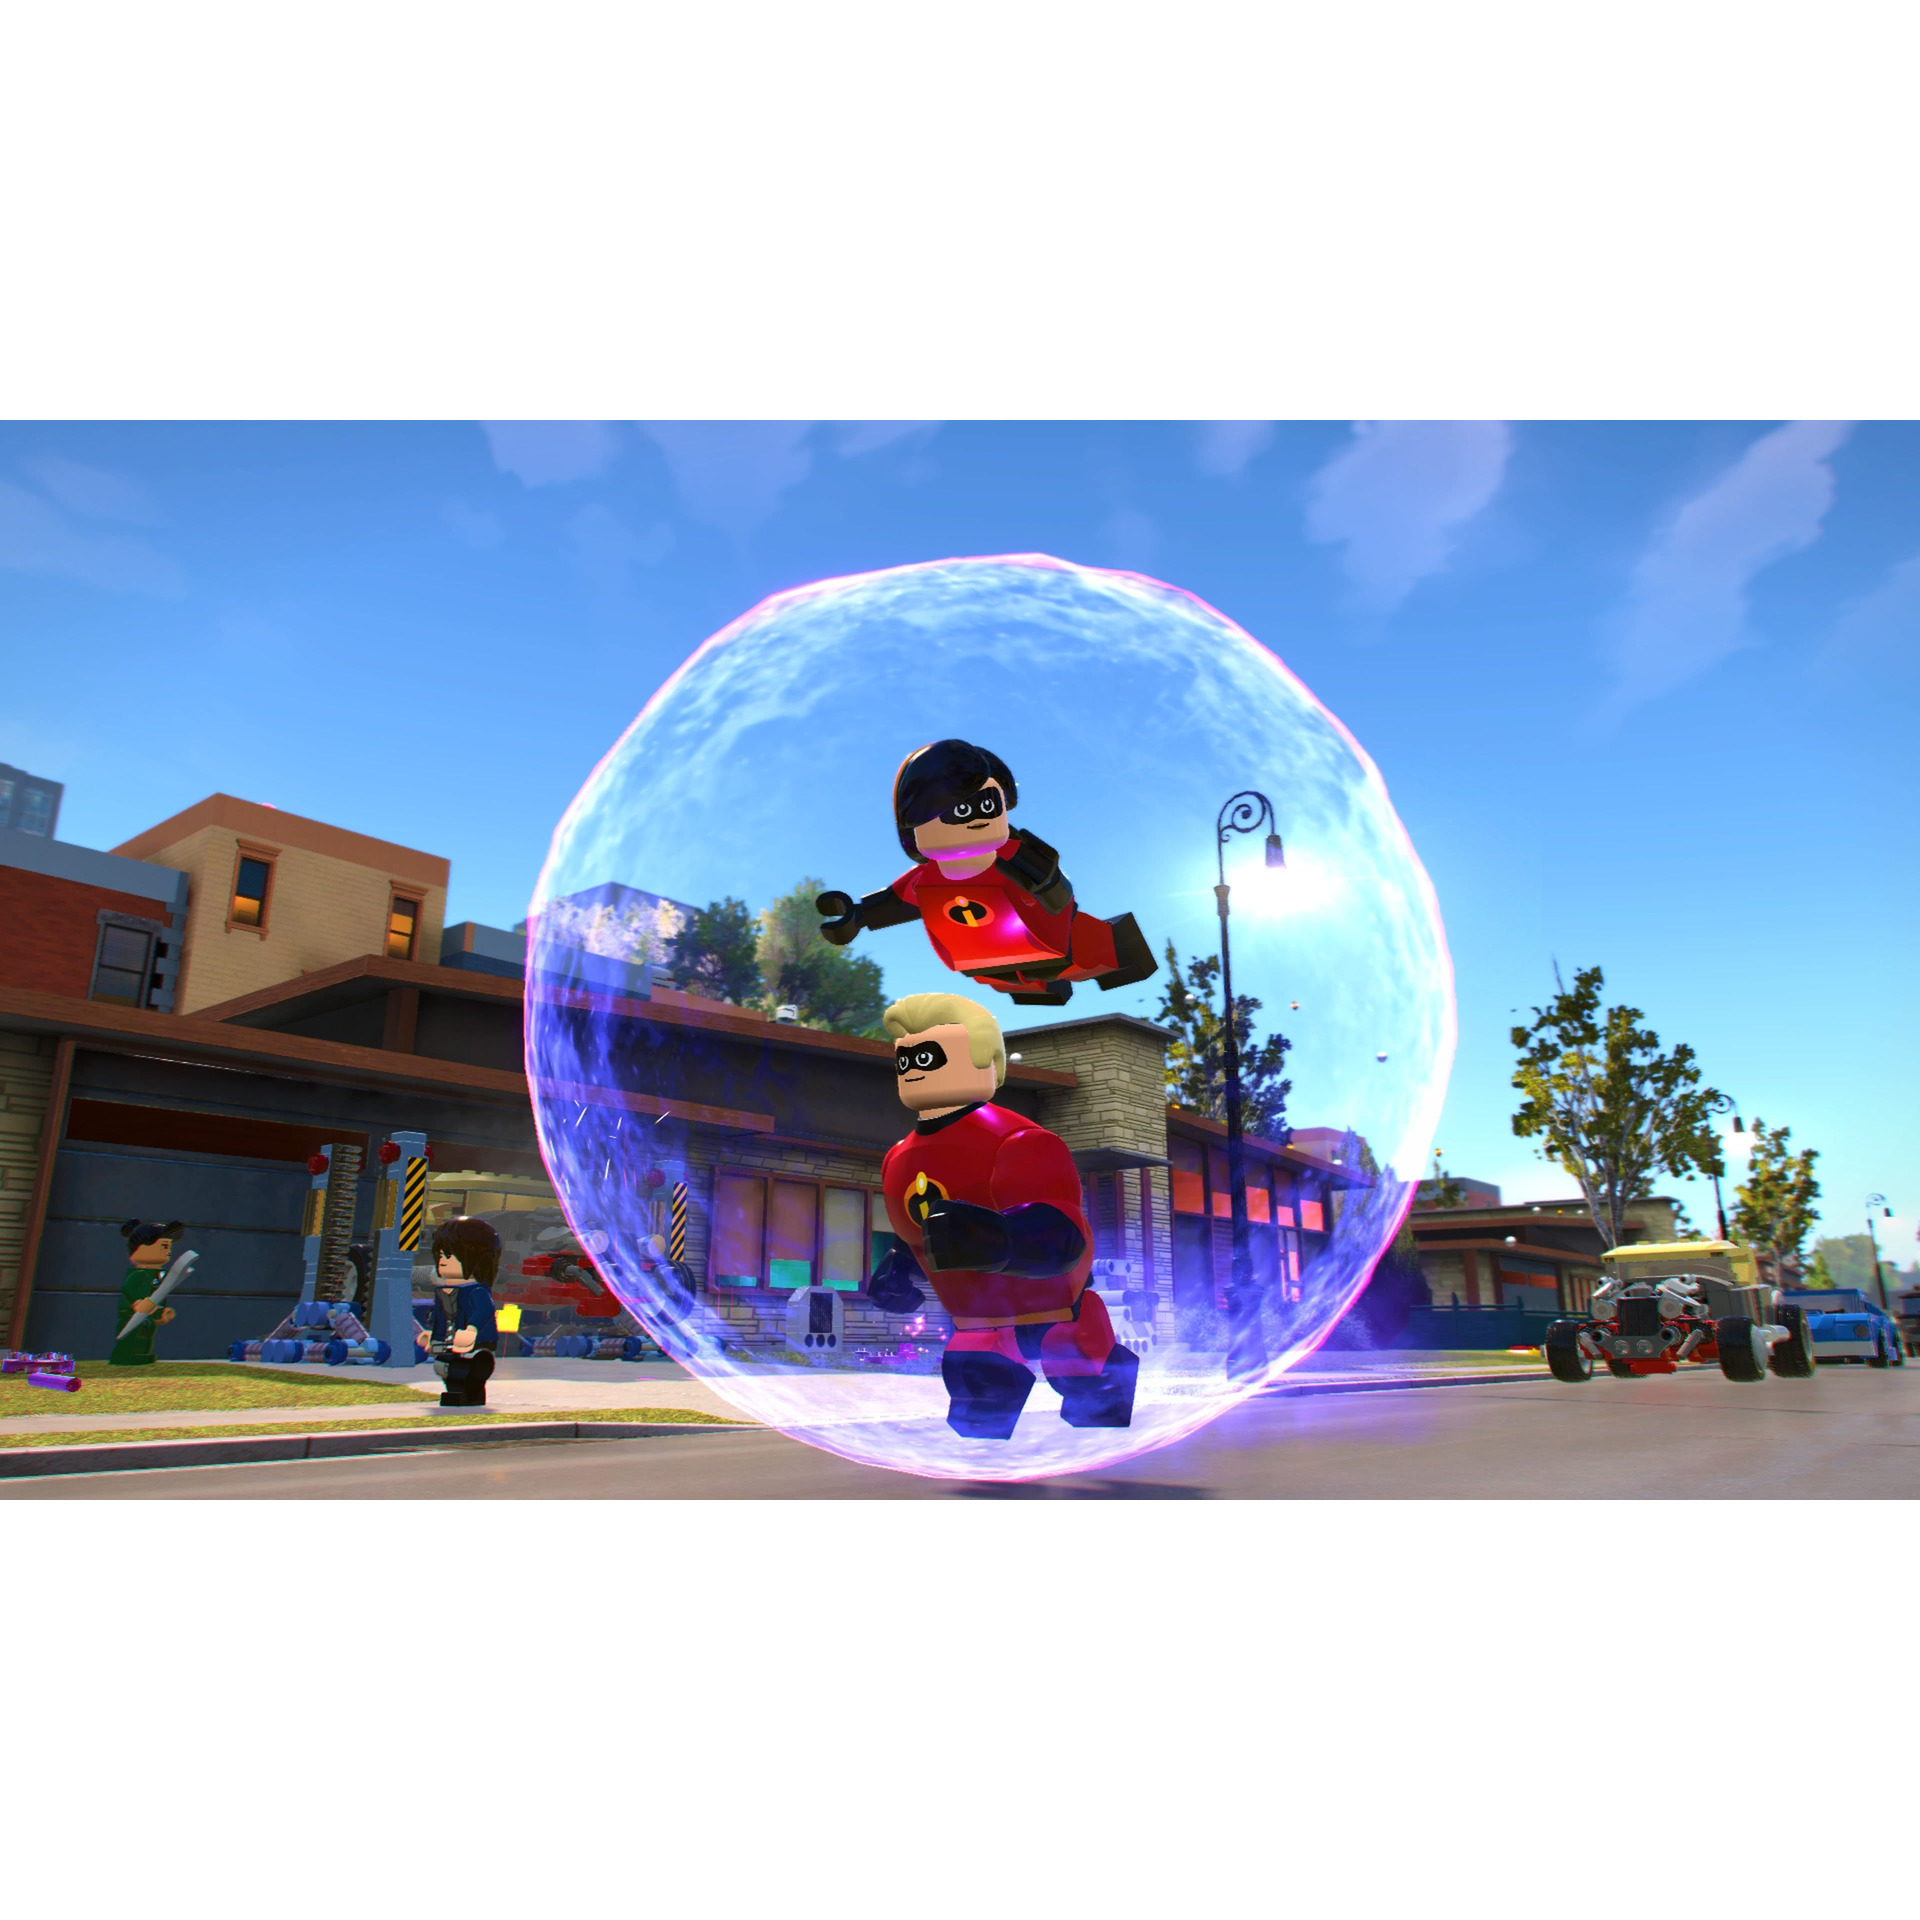 Игра WB LEGO THE INCREDIBLES (NSW)